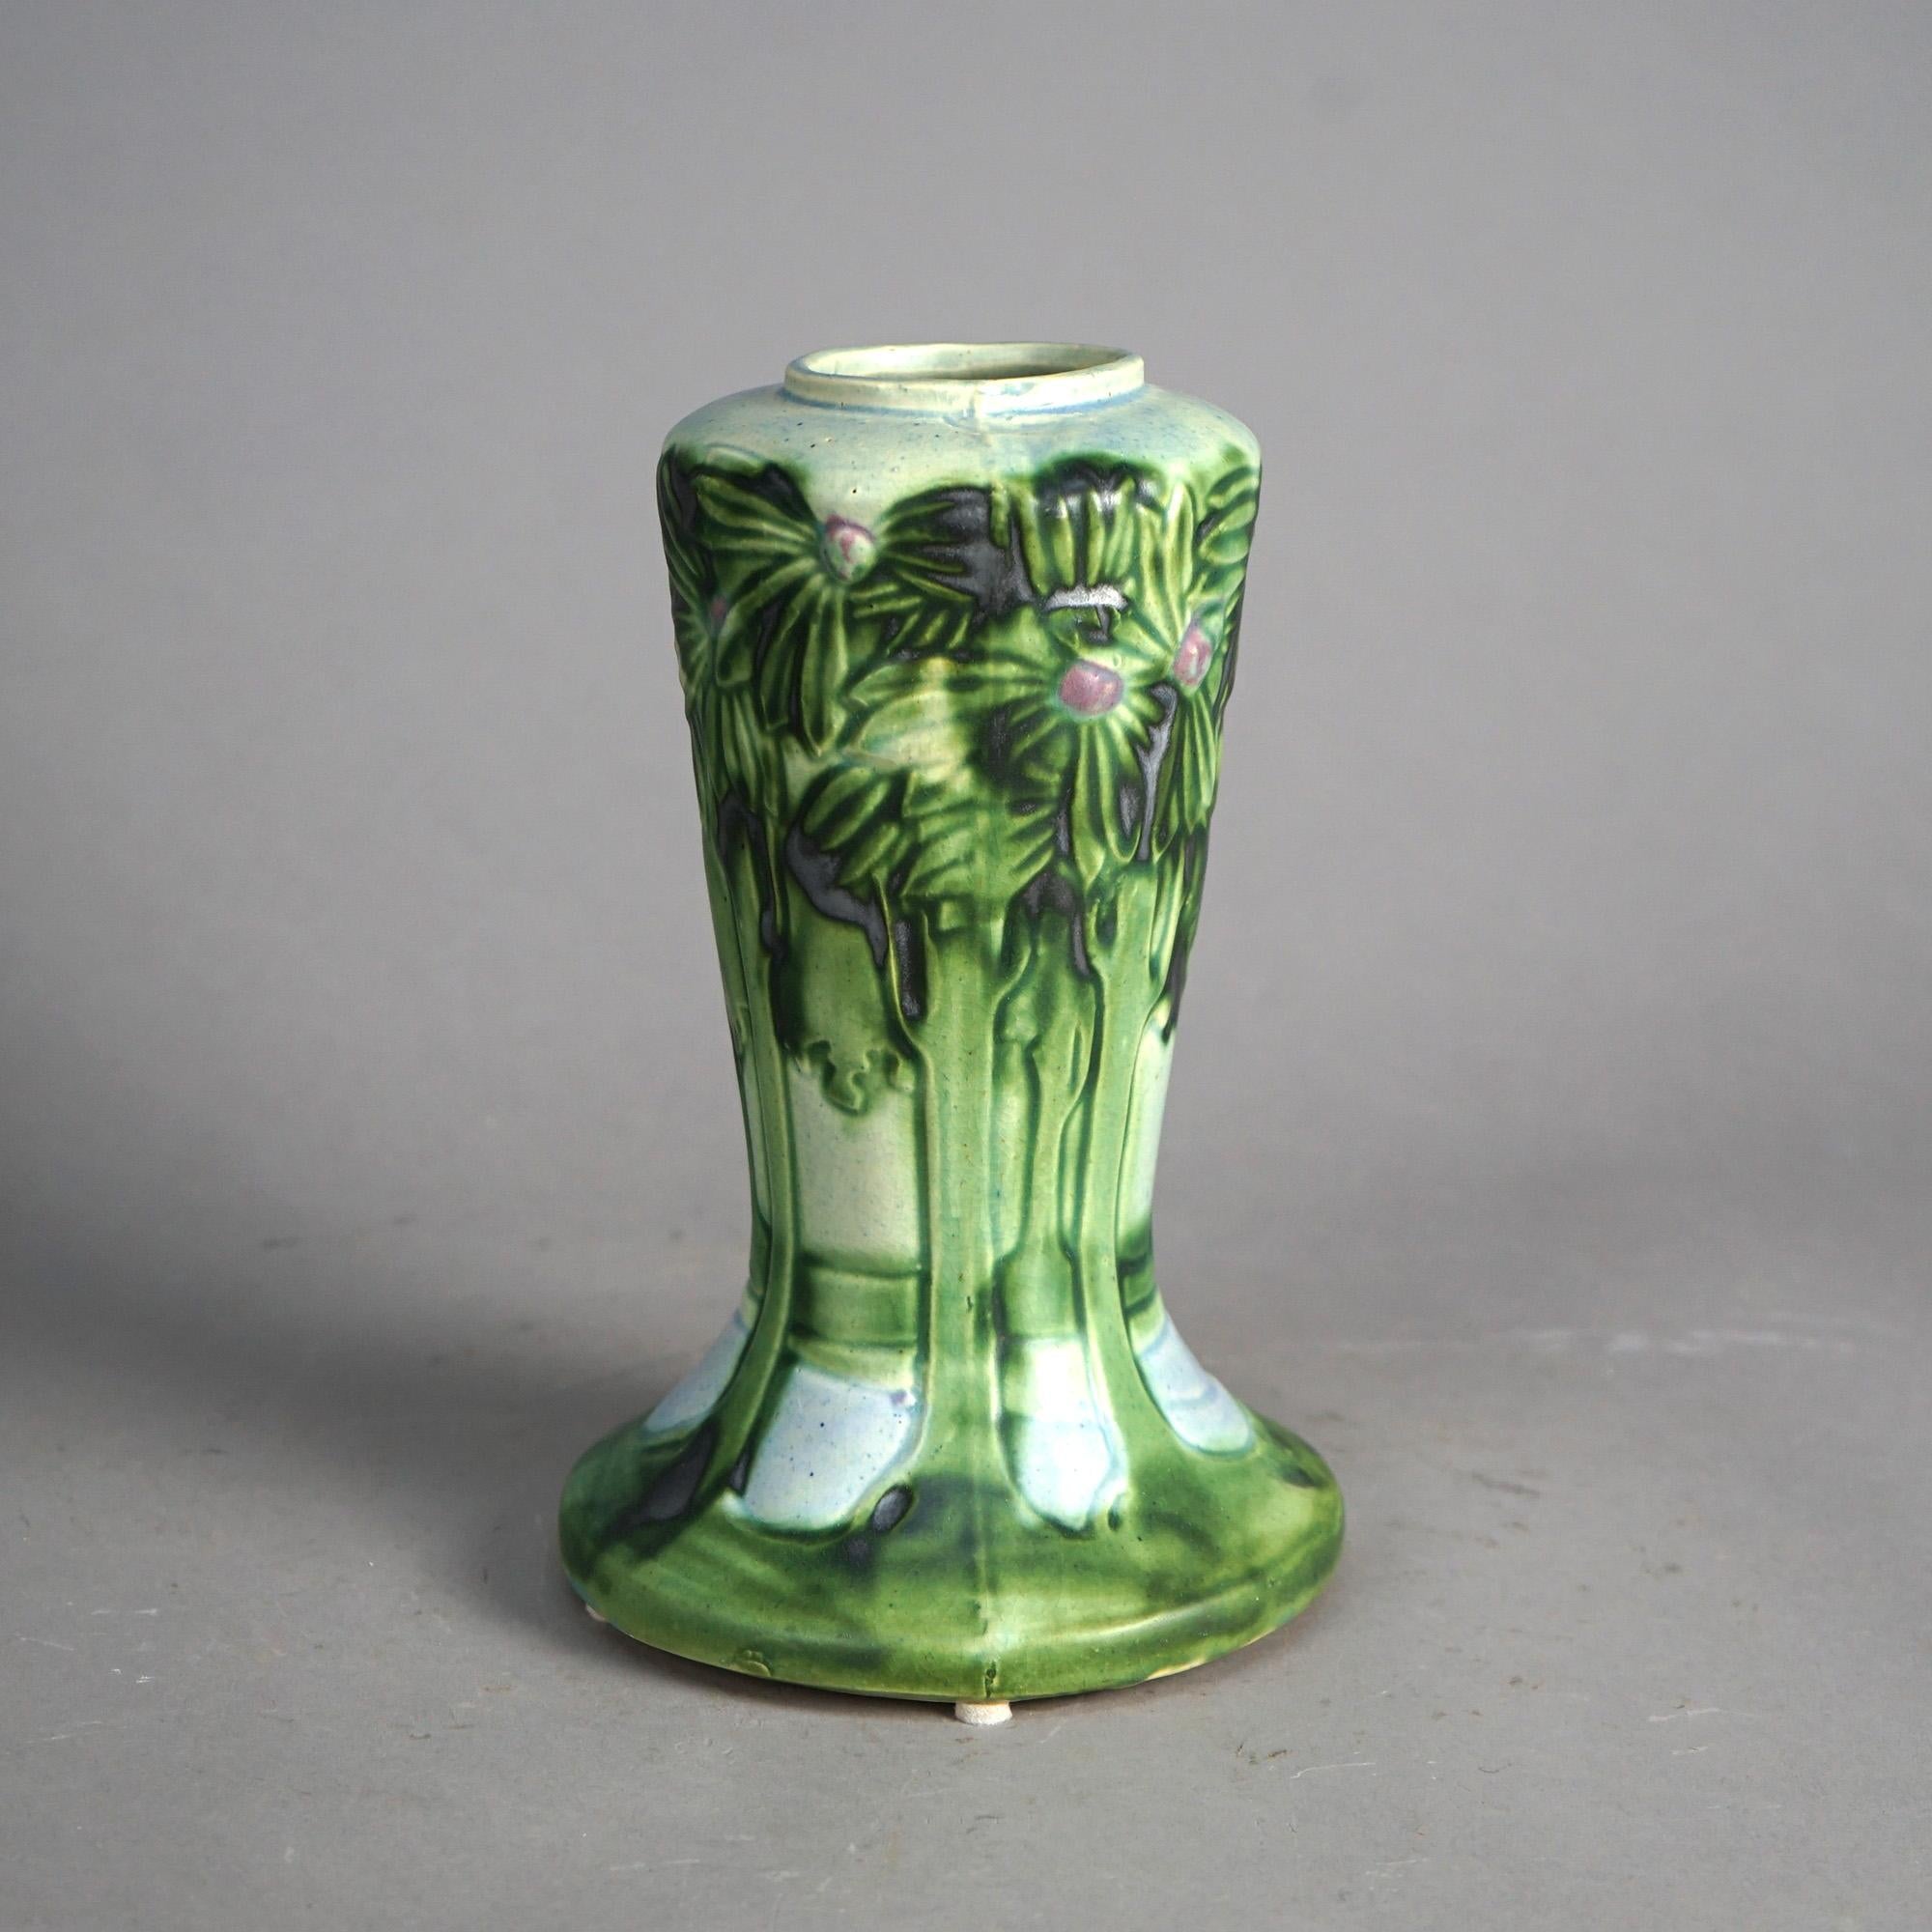 An antique vase by Roseville offers art pottery construction in flared form and having Vista design with trees and water, c1920

Measures - 10